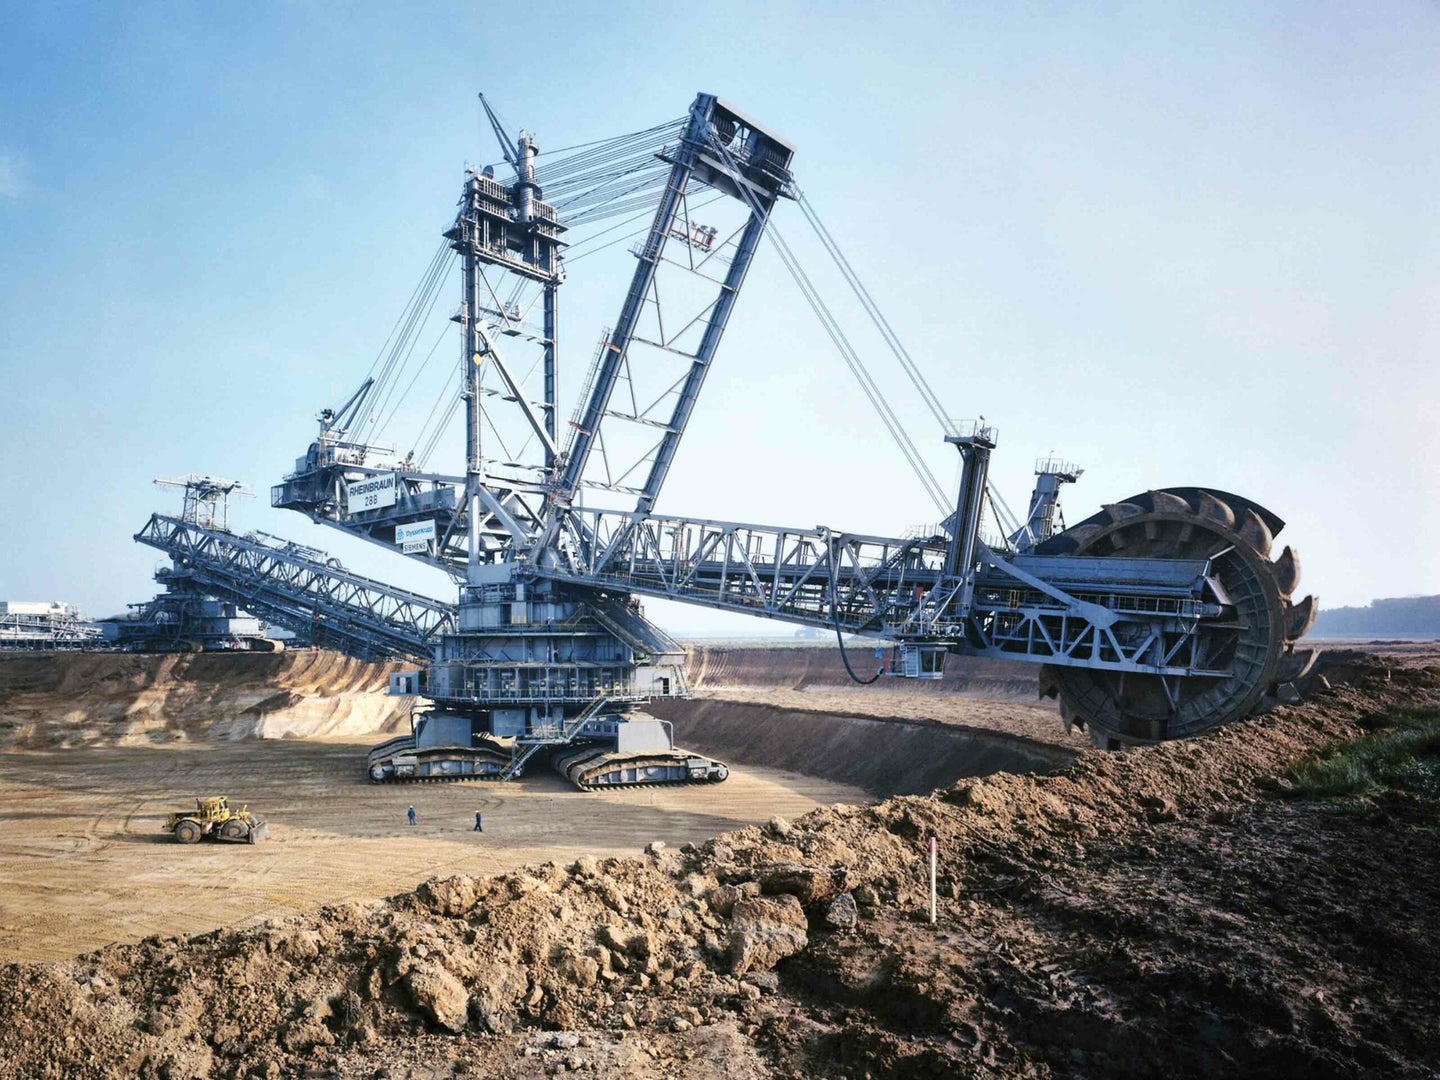 This excavator is one of the largest land vehicles on Earth